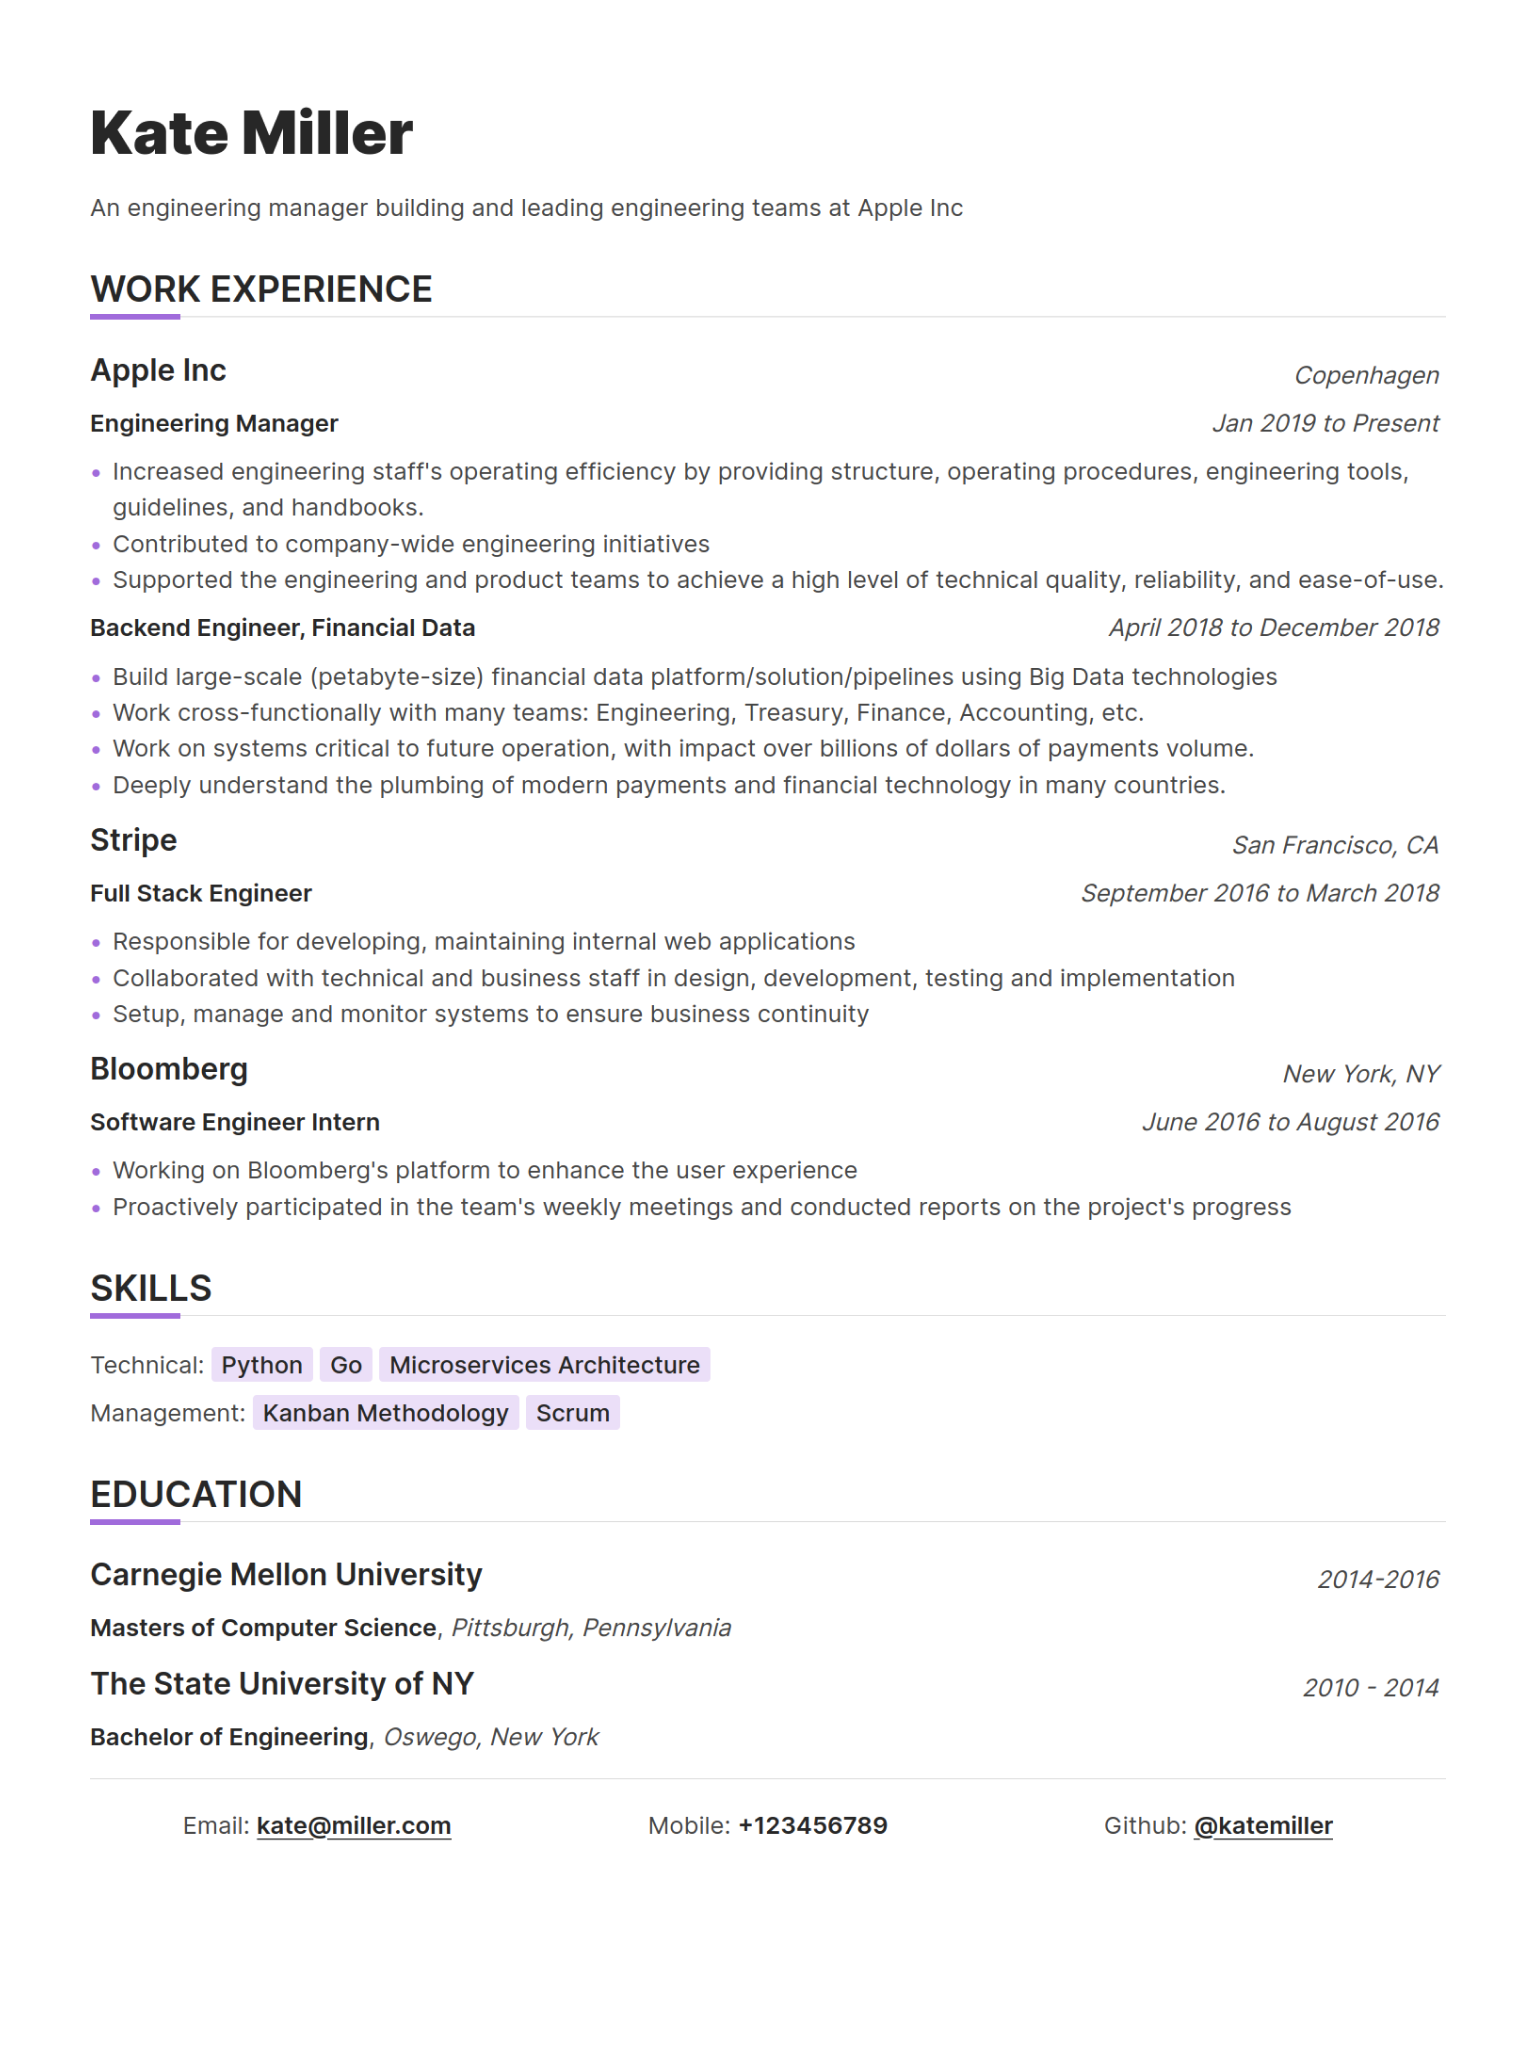 An image of a tech resume